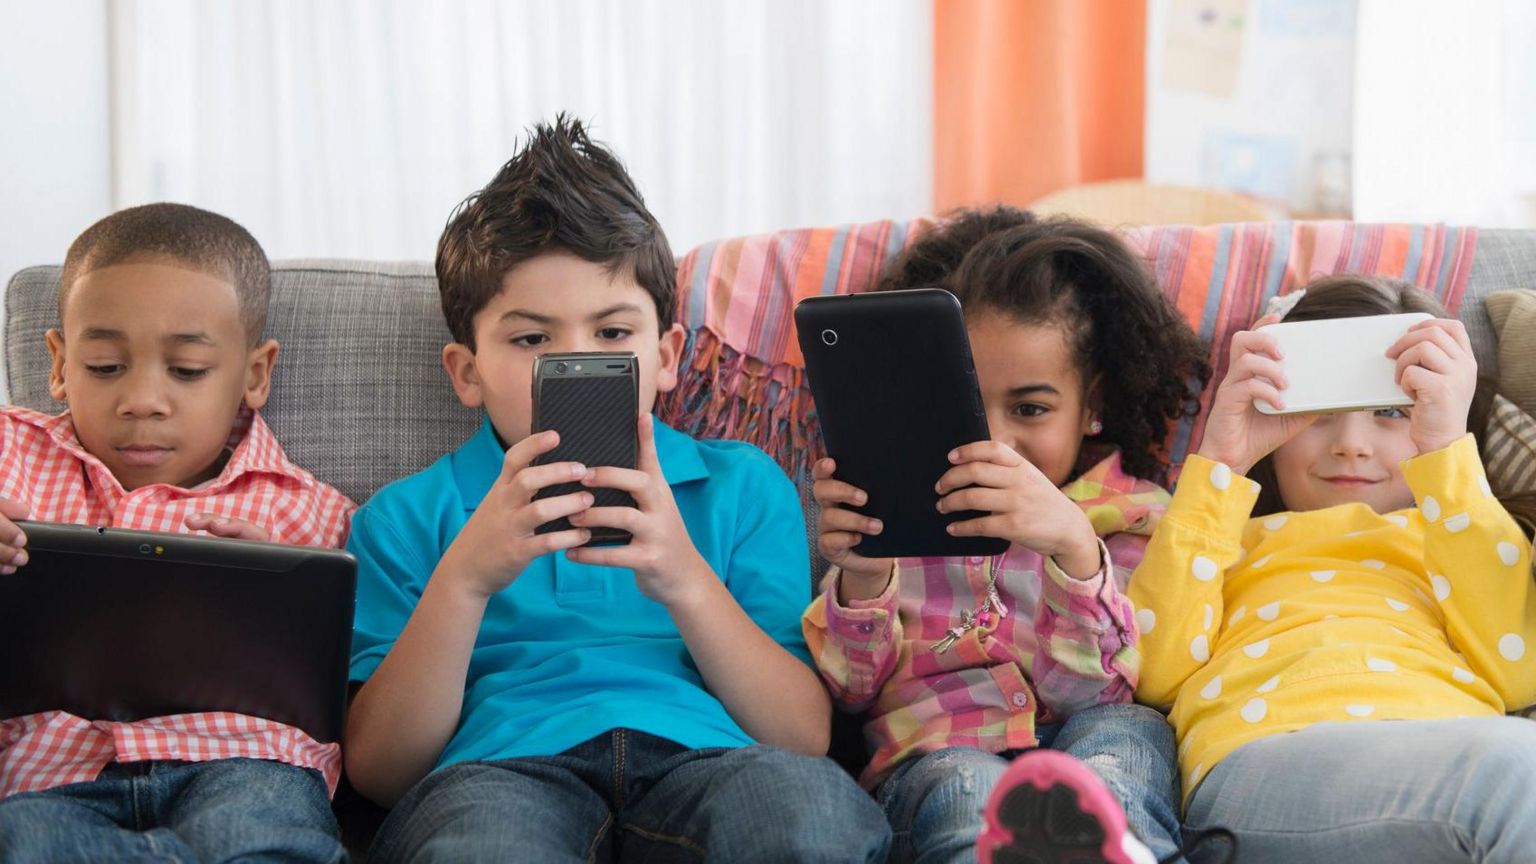 Children using phones and tablets